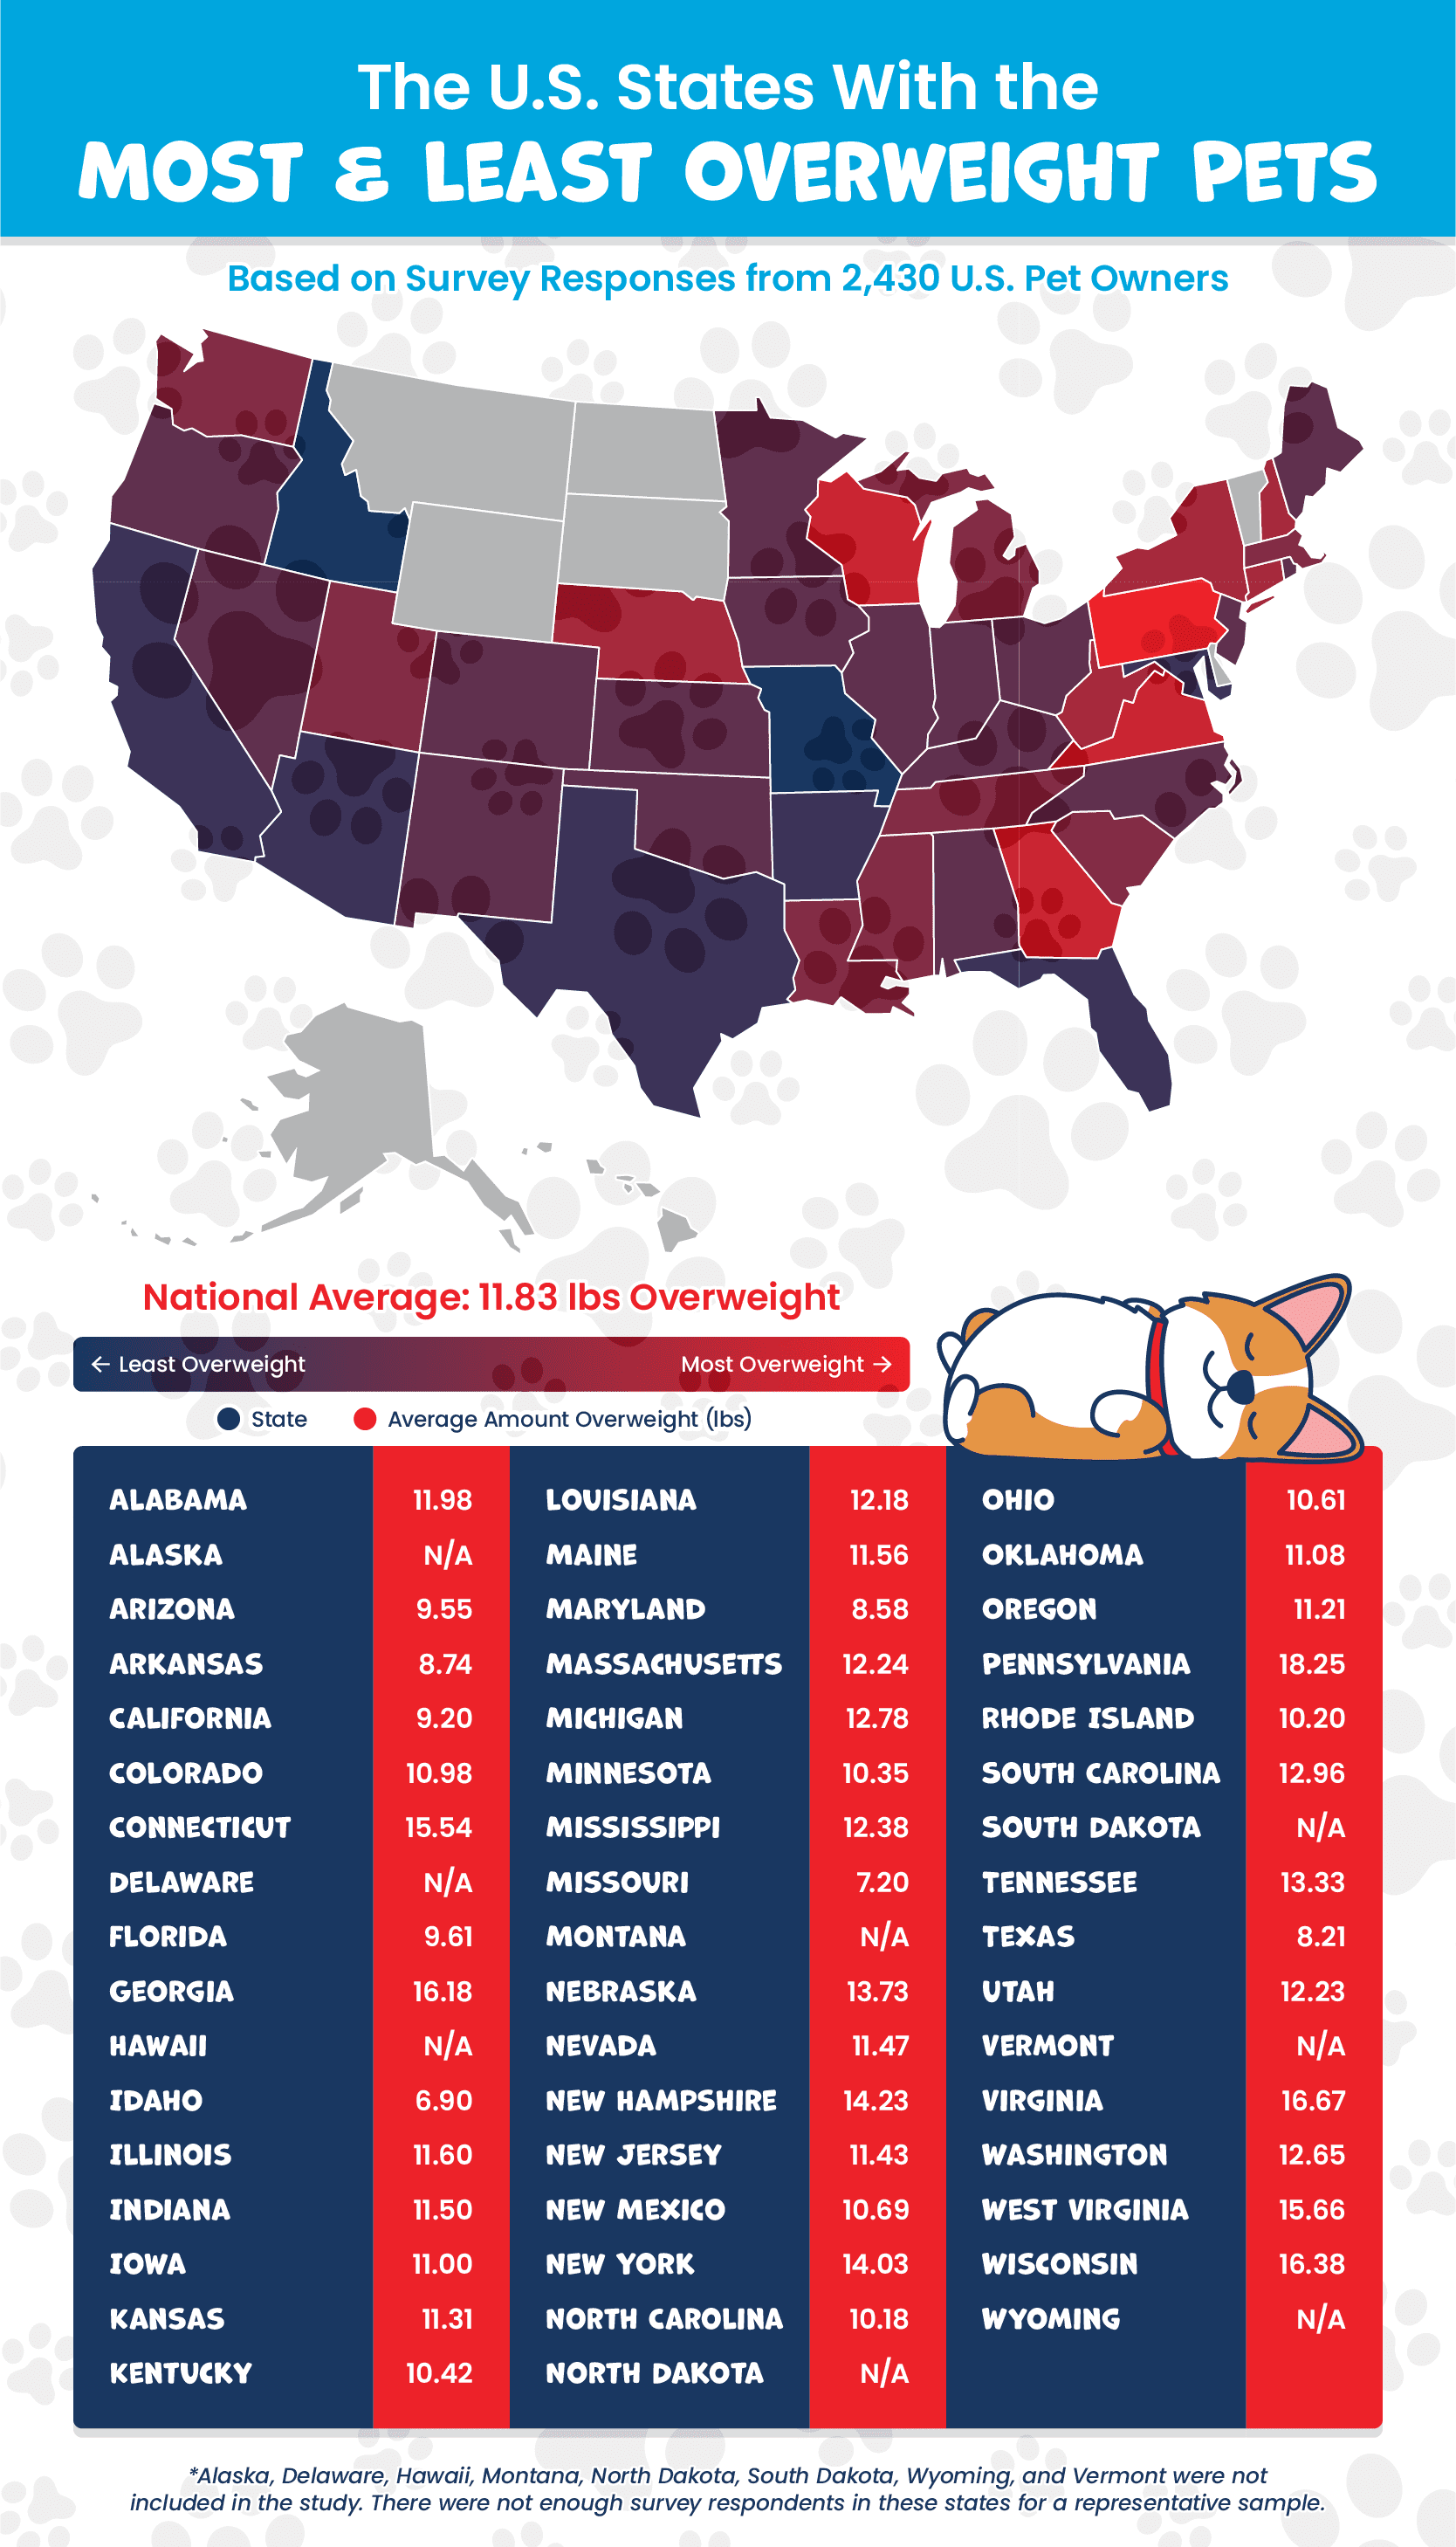 a U.S. heatmap showing the states with the most and least overweight pets